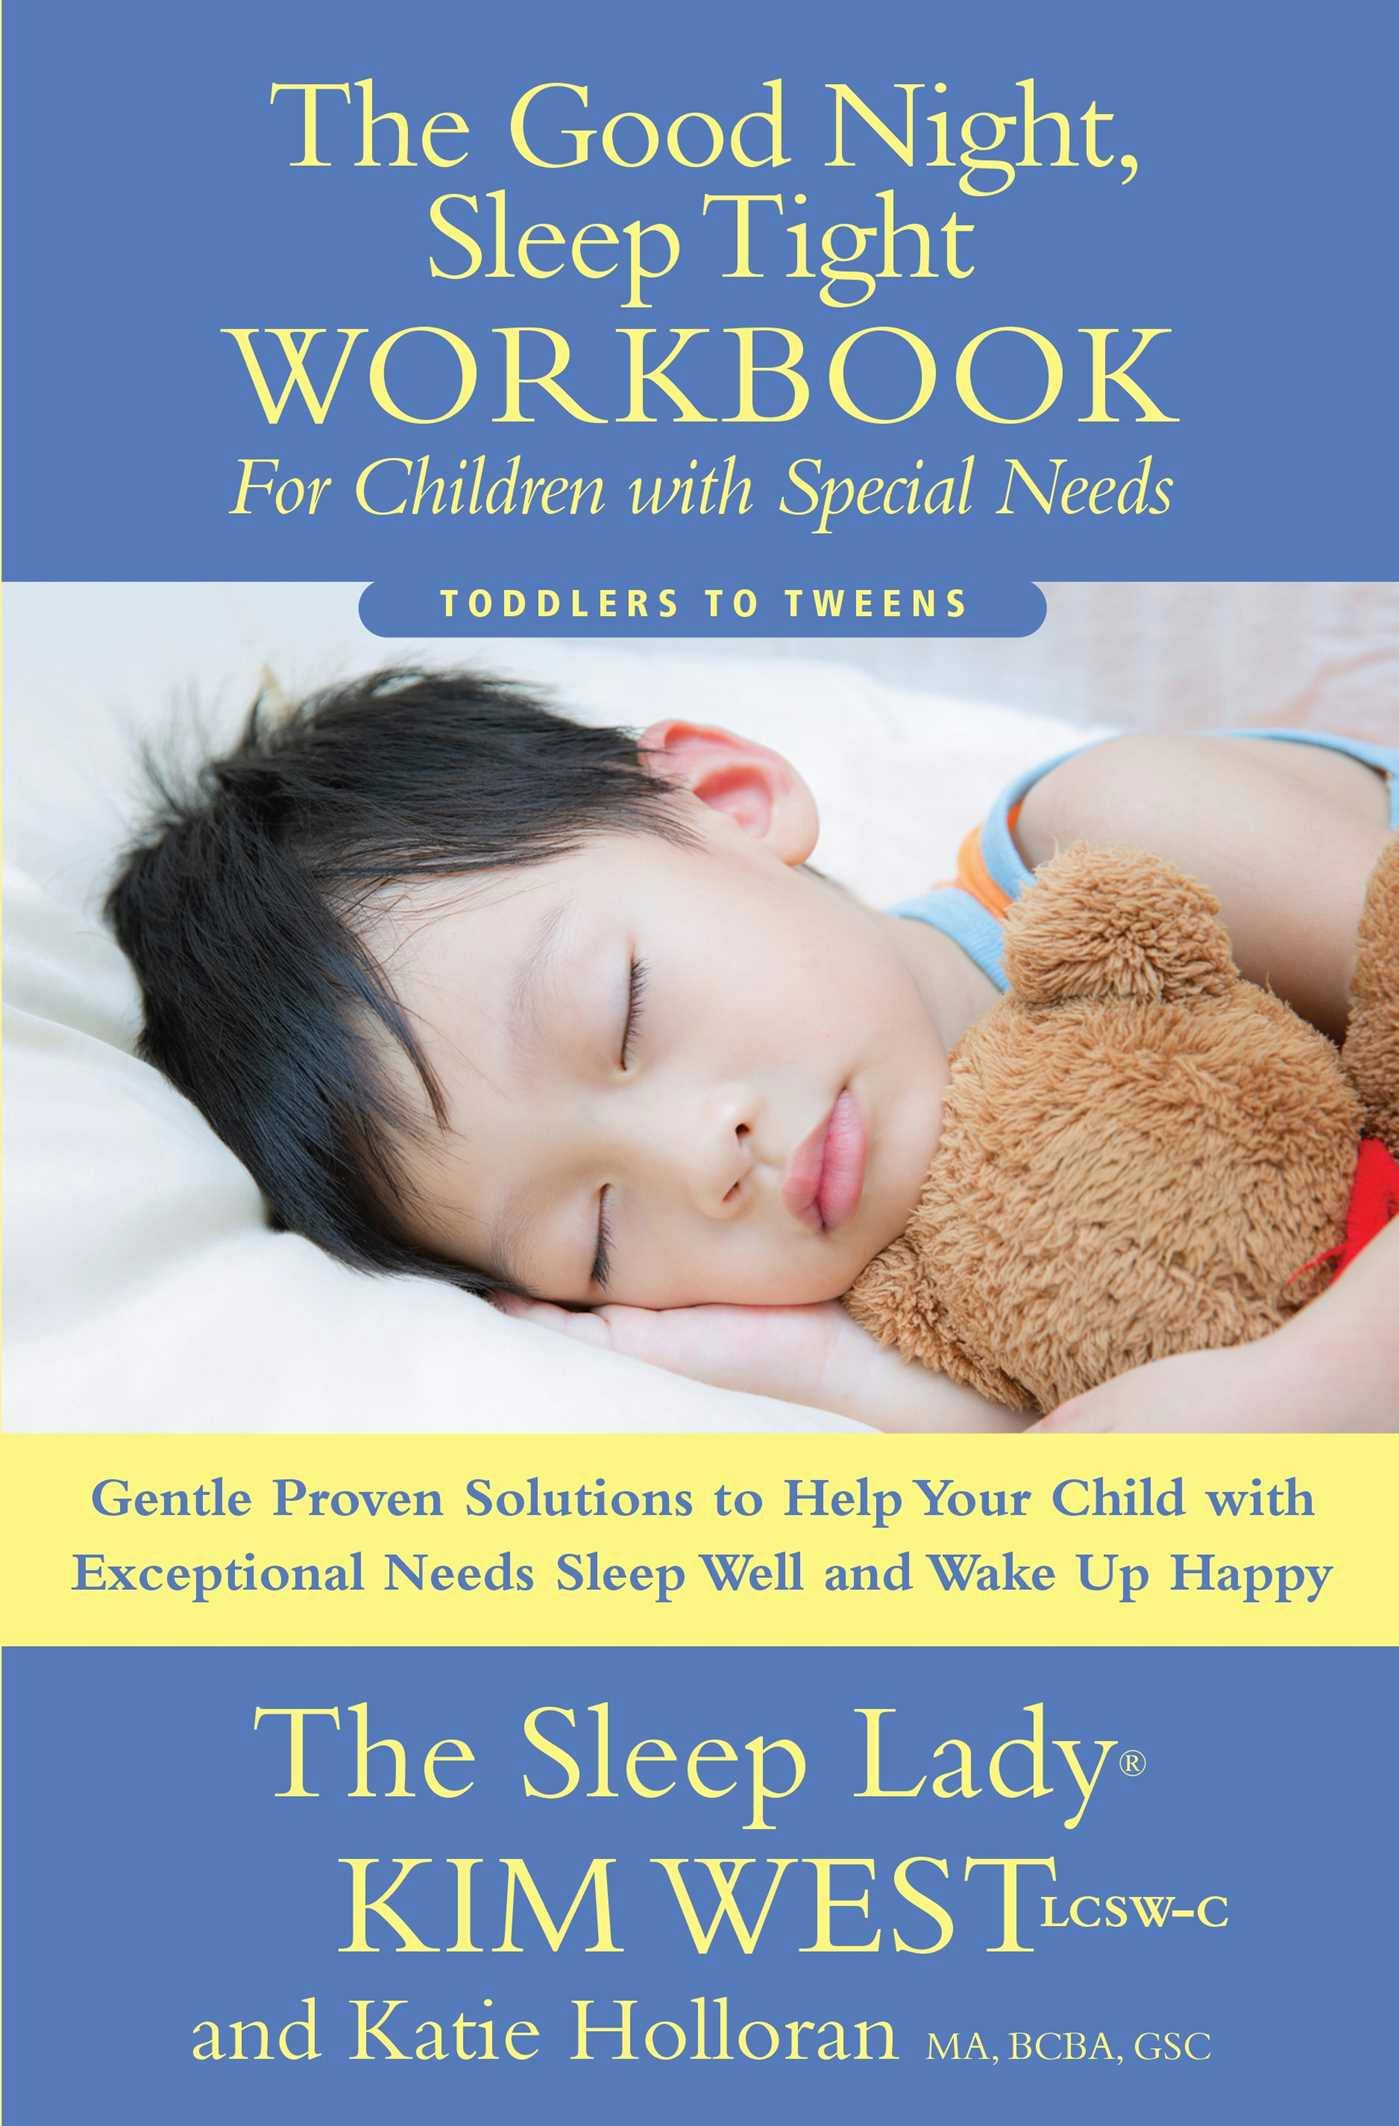 The Good Night Sleep Tight Workbook for Children Special Needs: Gentle Proven Solutions to Help Your Child with Exceptional Needs Sleep Well - undefined